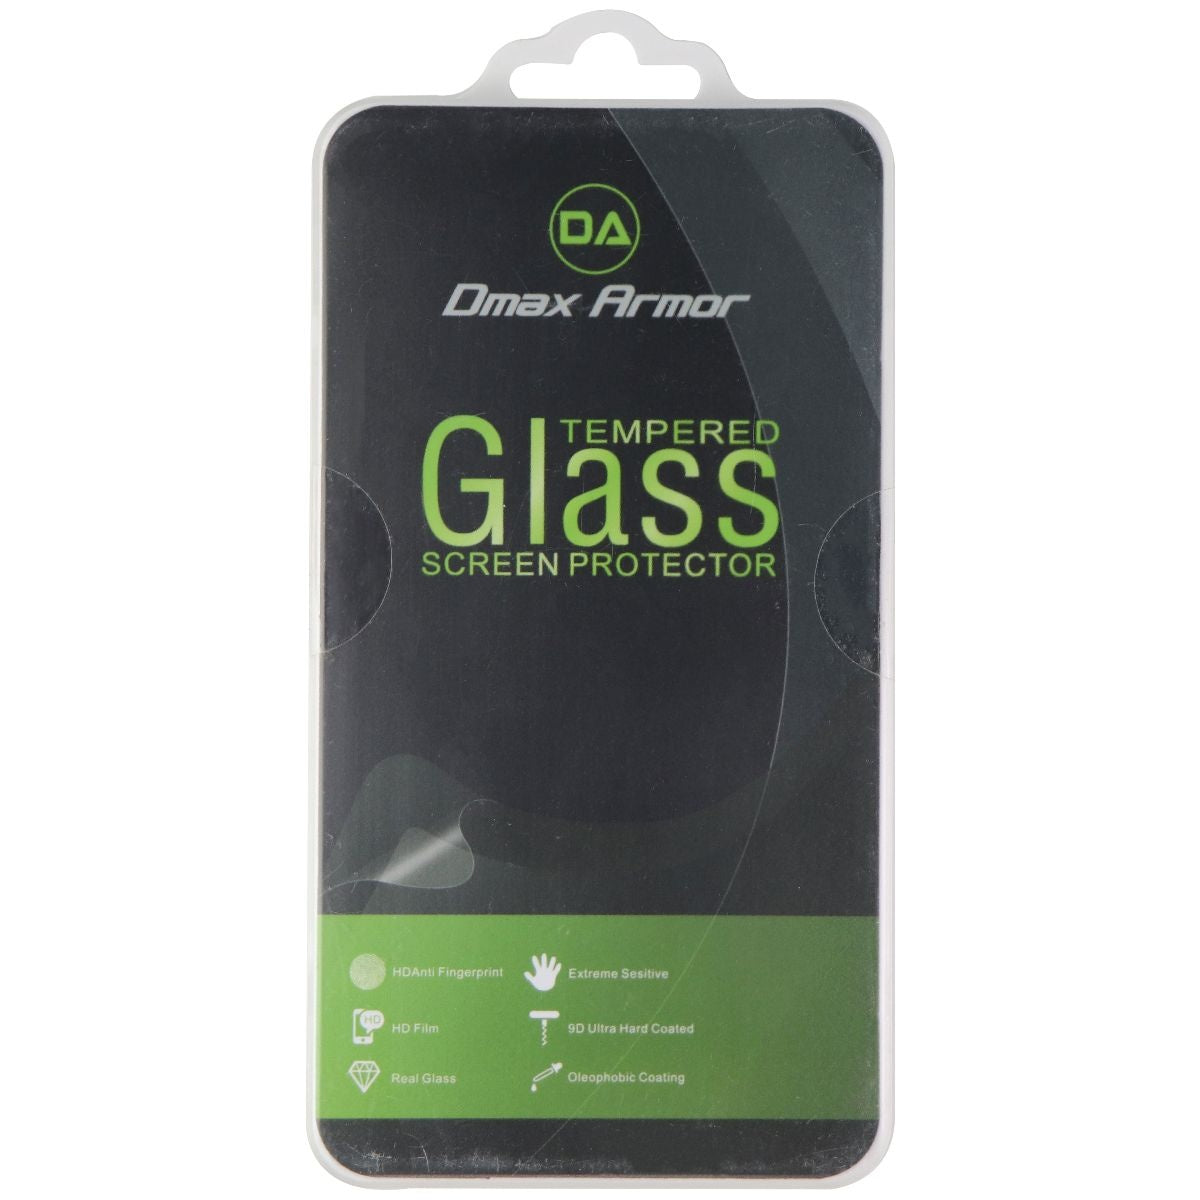 Dmax Armor Tempered Glass Screen Protector for LG G Vista Smartphone - Clear Cell Phone - Screen Protectors Dmax Armor    - Simple Cell Bulk Wholesale Pricing - USA Seller